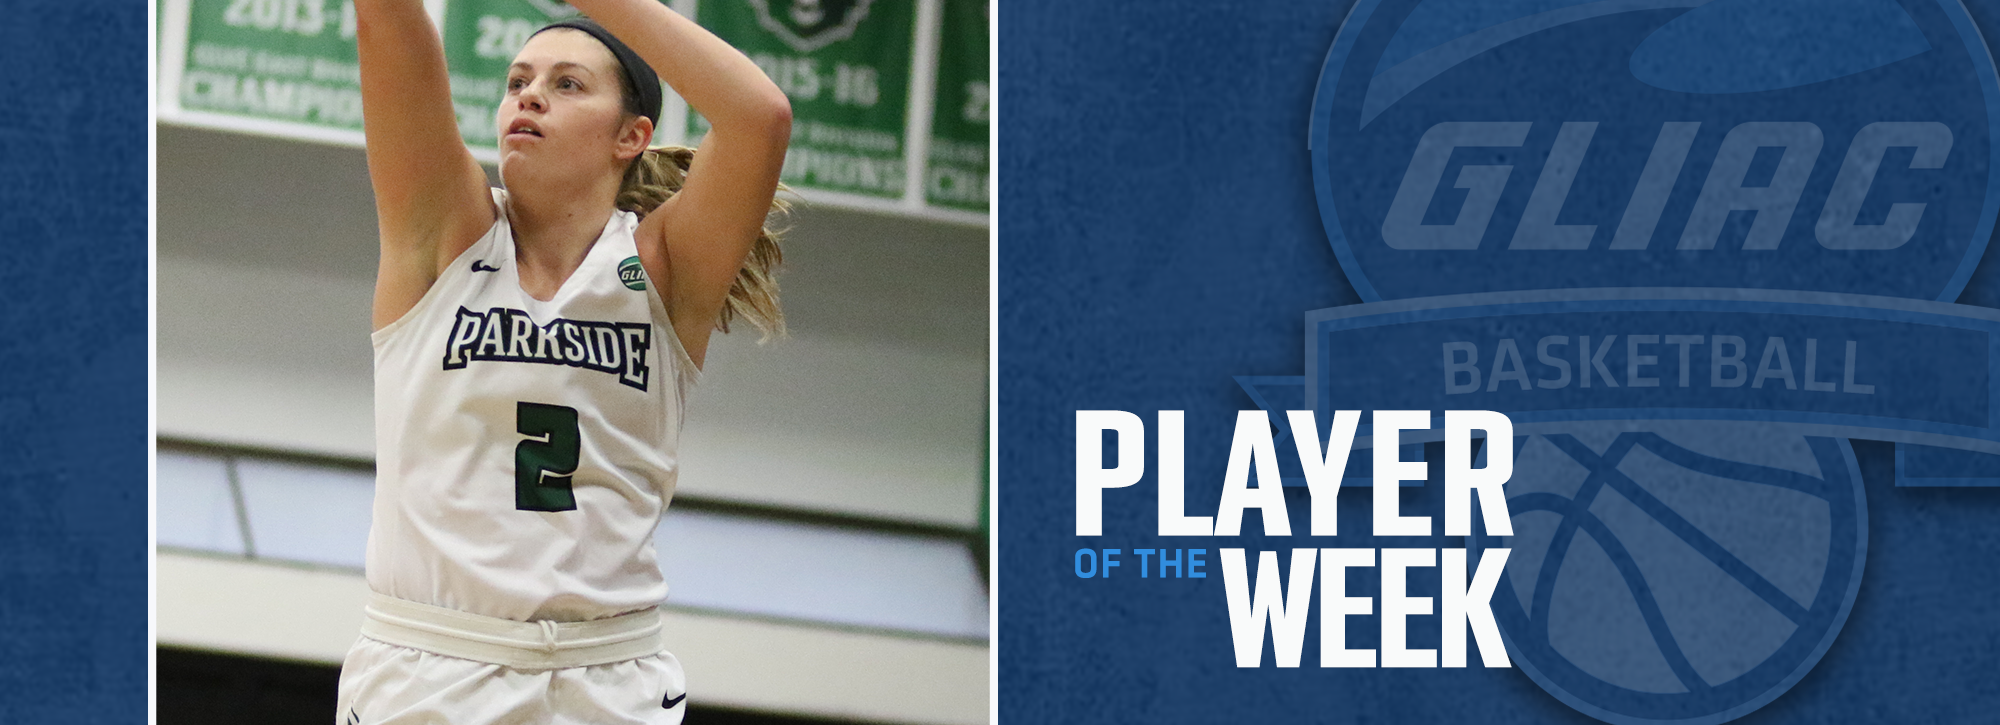 Parkside's Nelson named GLIAC Women's Basketball Player of the Week